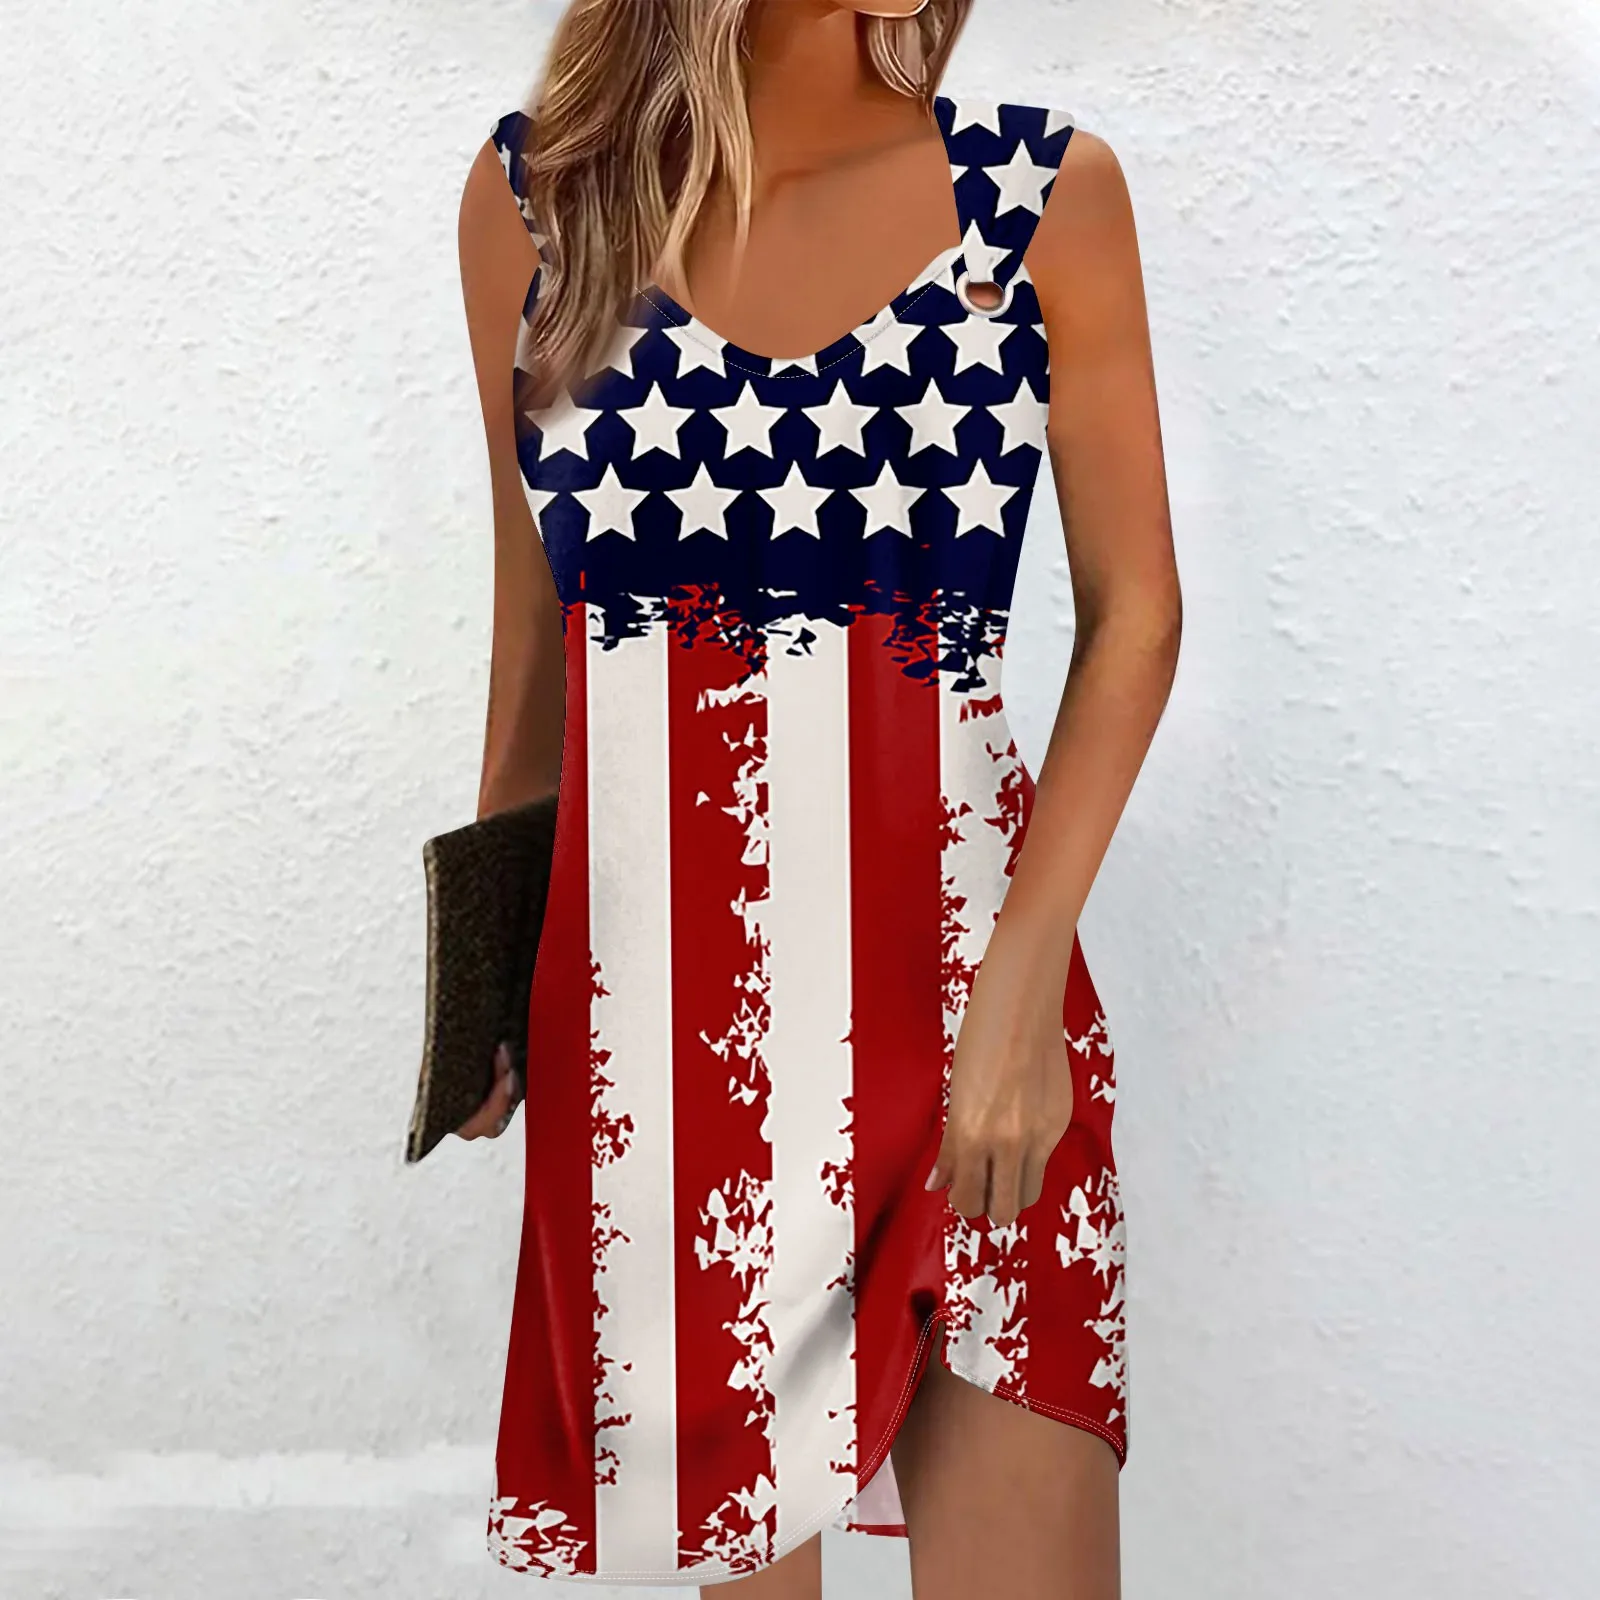 

Iron ring dress, women's national flag, 3D printed pattern, summer long casual loose fit